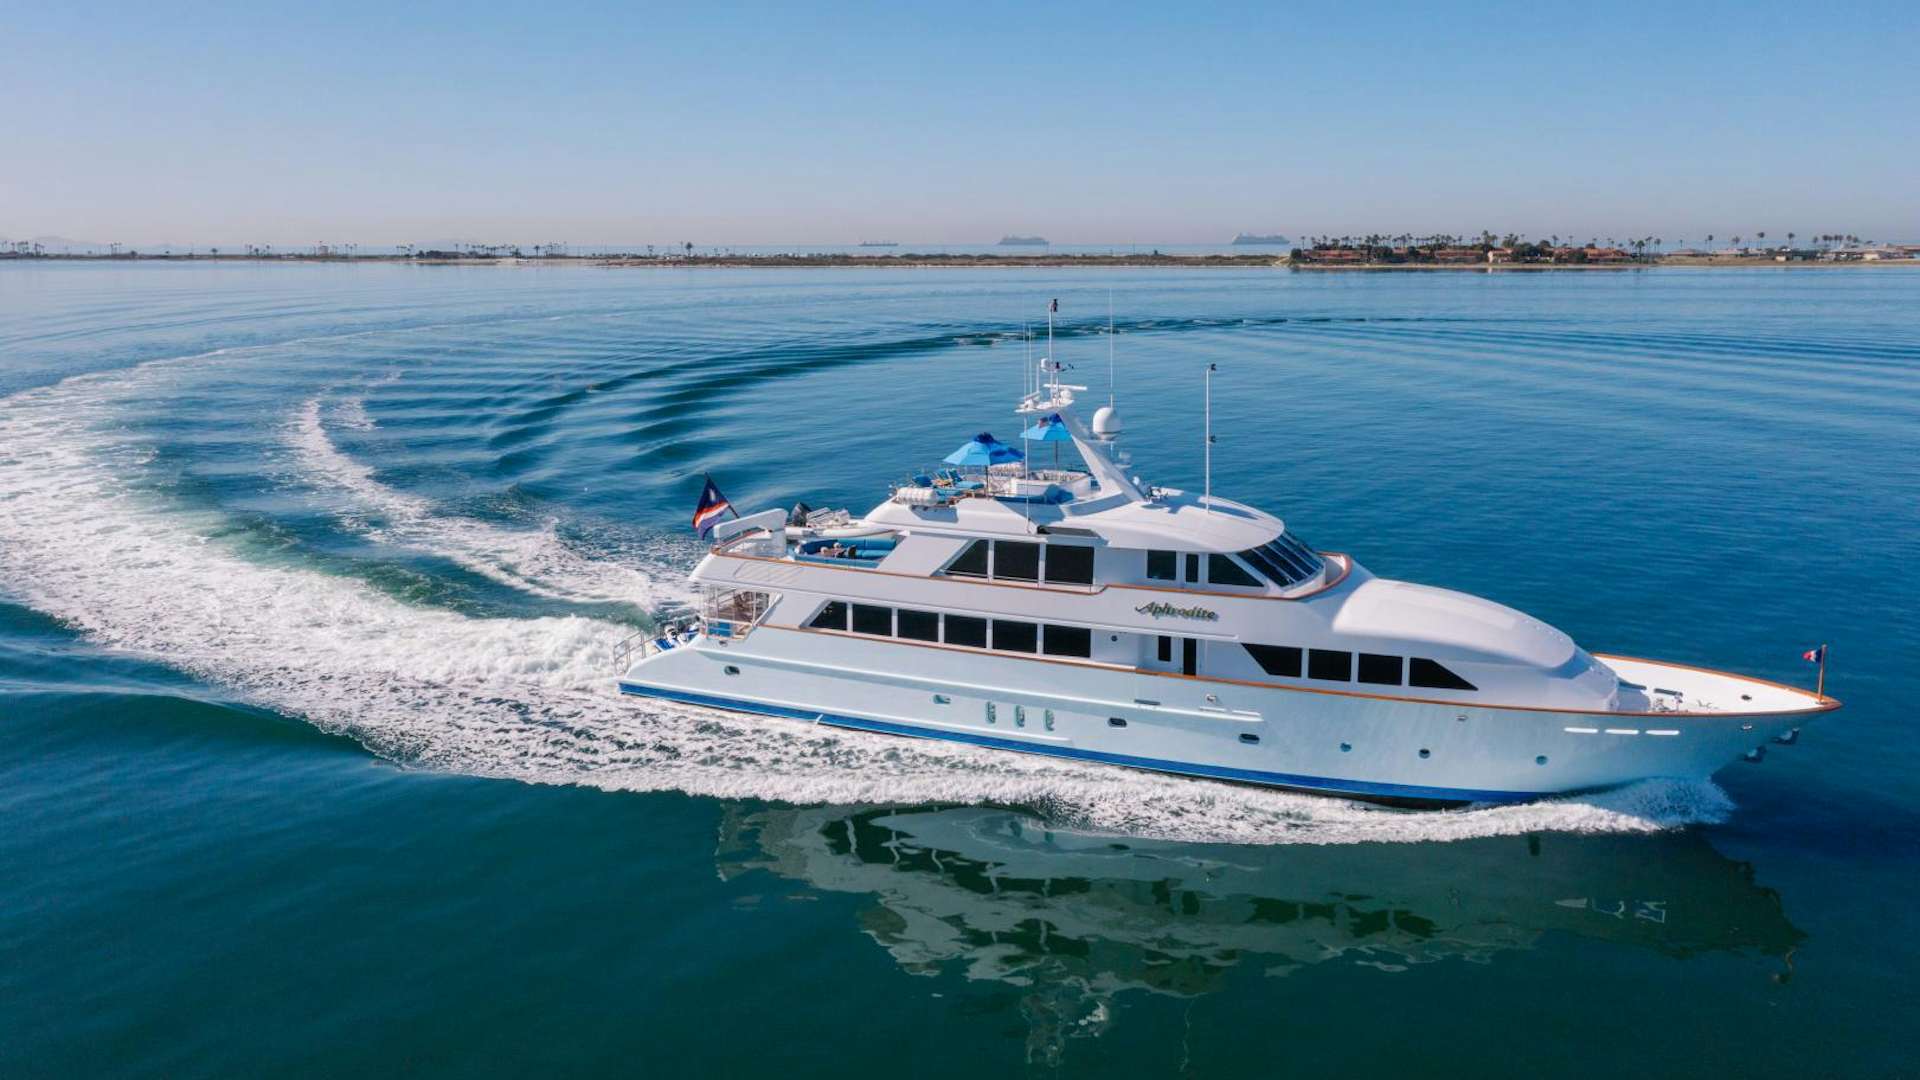 Watch Video for APHRODITE Yacht for Sale